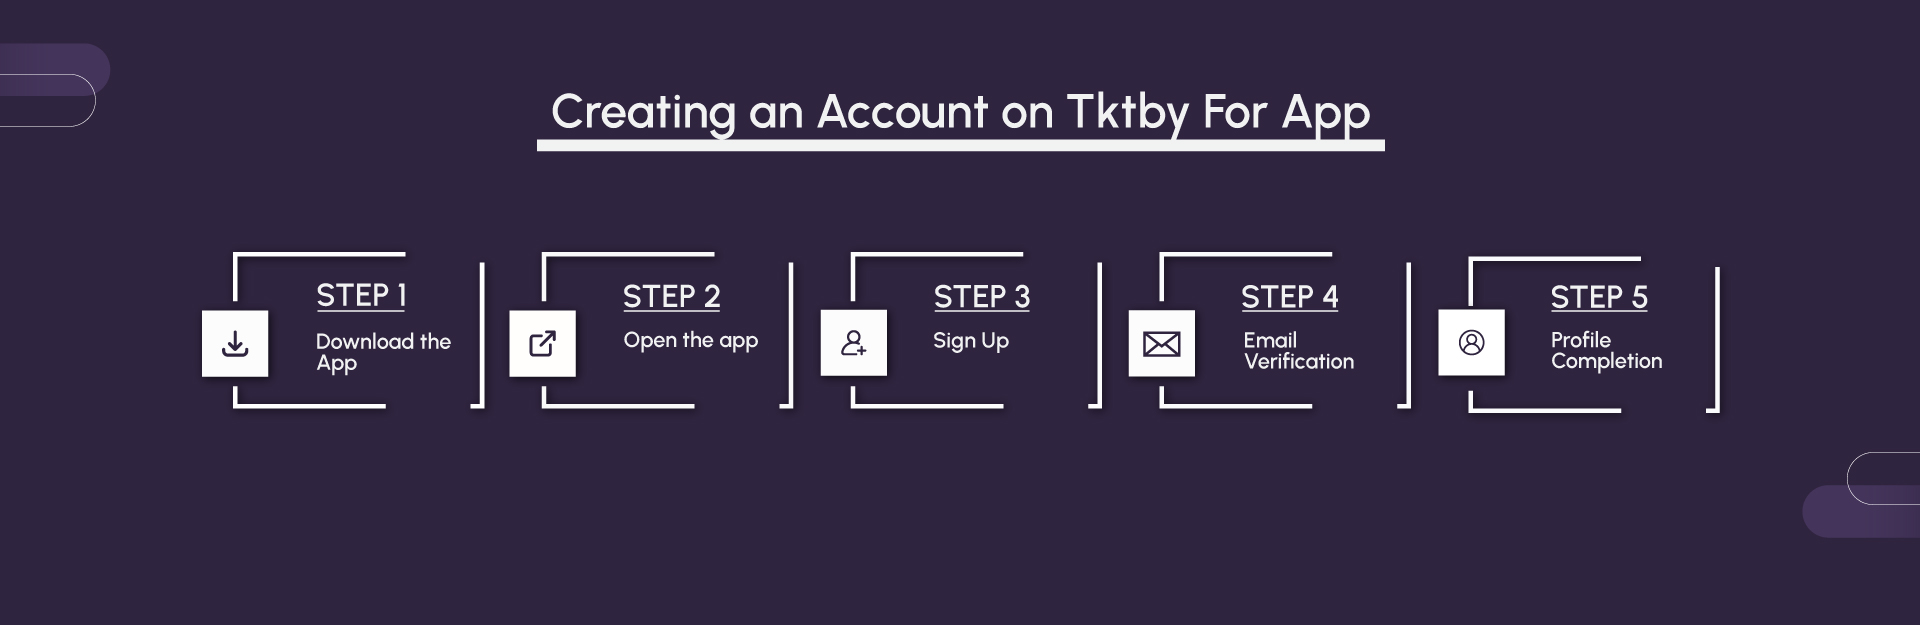 A guide to accessing your ticket in the Tktby App